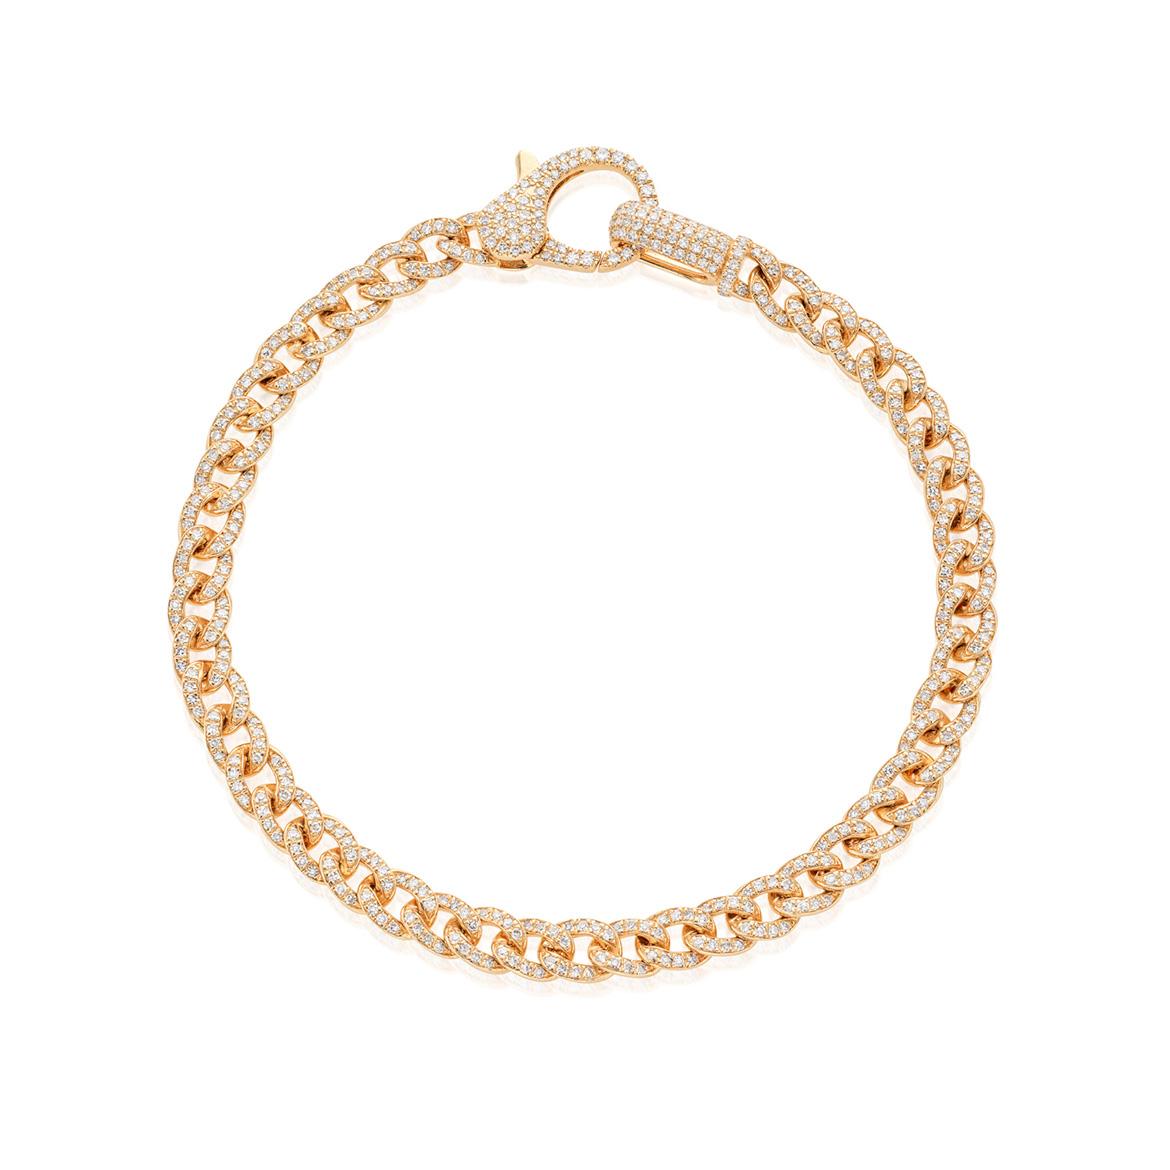 Pave Diamond Curb Link and Clasp Bracelet in 14k Yellow Gold